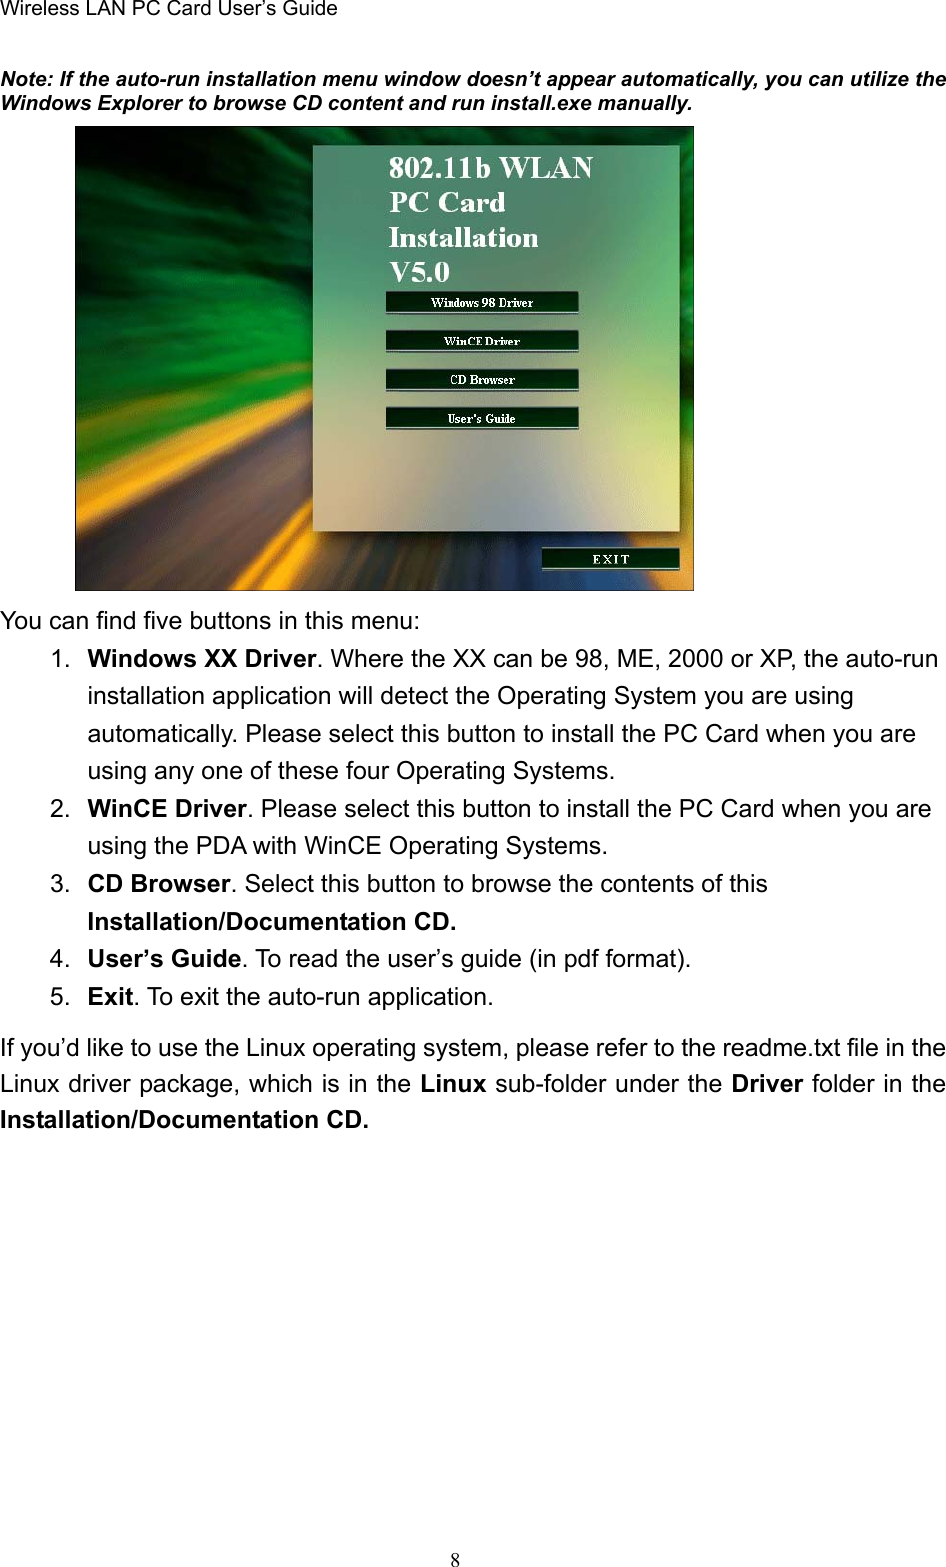 Wireless LAN PC Card User’s Guide8Note: If the auto-run installation menu window doesn’t appear automatically, you can utilize theWindows Explorer to browse CD content and run install.exe manually.You can find five buttons in this menu:1.  Windows XX Driver. Where the XX can be 98, ME, 2000 or XP, the auto-runinstallation application will detect the Operating System you are usingautomatically. Please select this button to install the PC Card when you areusing any one of these four Operating Systems.2.  WinCE Driver. Please select this button to install the PC Card when you areusing the PDA with WinCE Operating Systems.3.  CD Browser. Select this button to browse the contents of thisInstallation/Documentation CD.4.  User’s Guide. To read the user’s guide (in pdf format).5.  Exit. To exit the auto-run application.If you’d like to use the Linux operating system, please refer to the readme.txt file in theLinux driver package, which is in the Linux sub-folder under the Driver folder in theInstallation/Documentation CD.